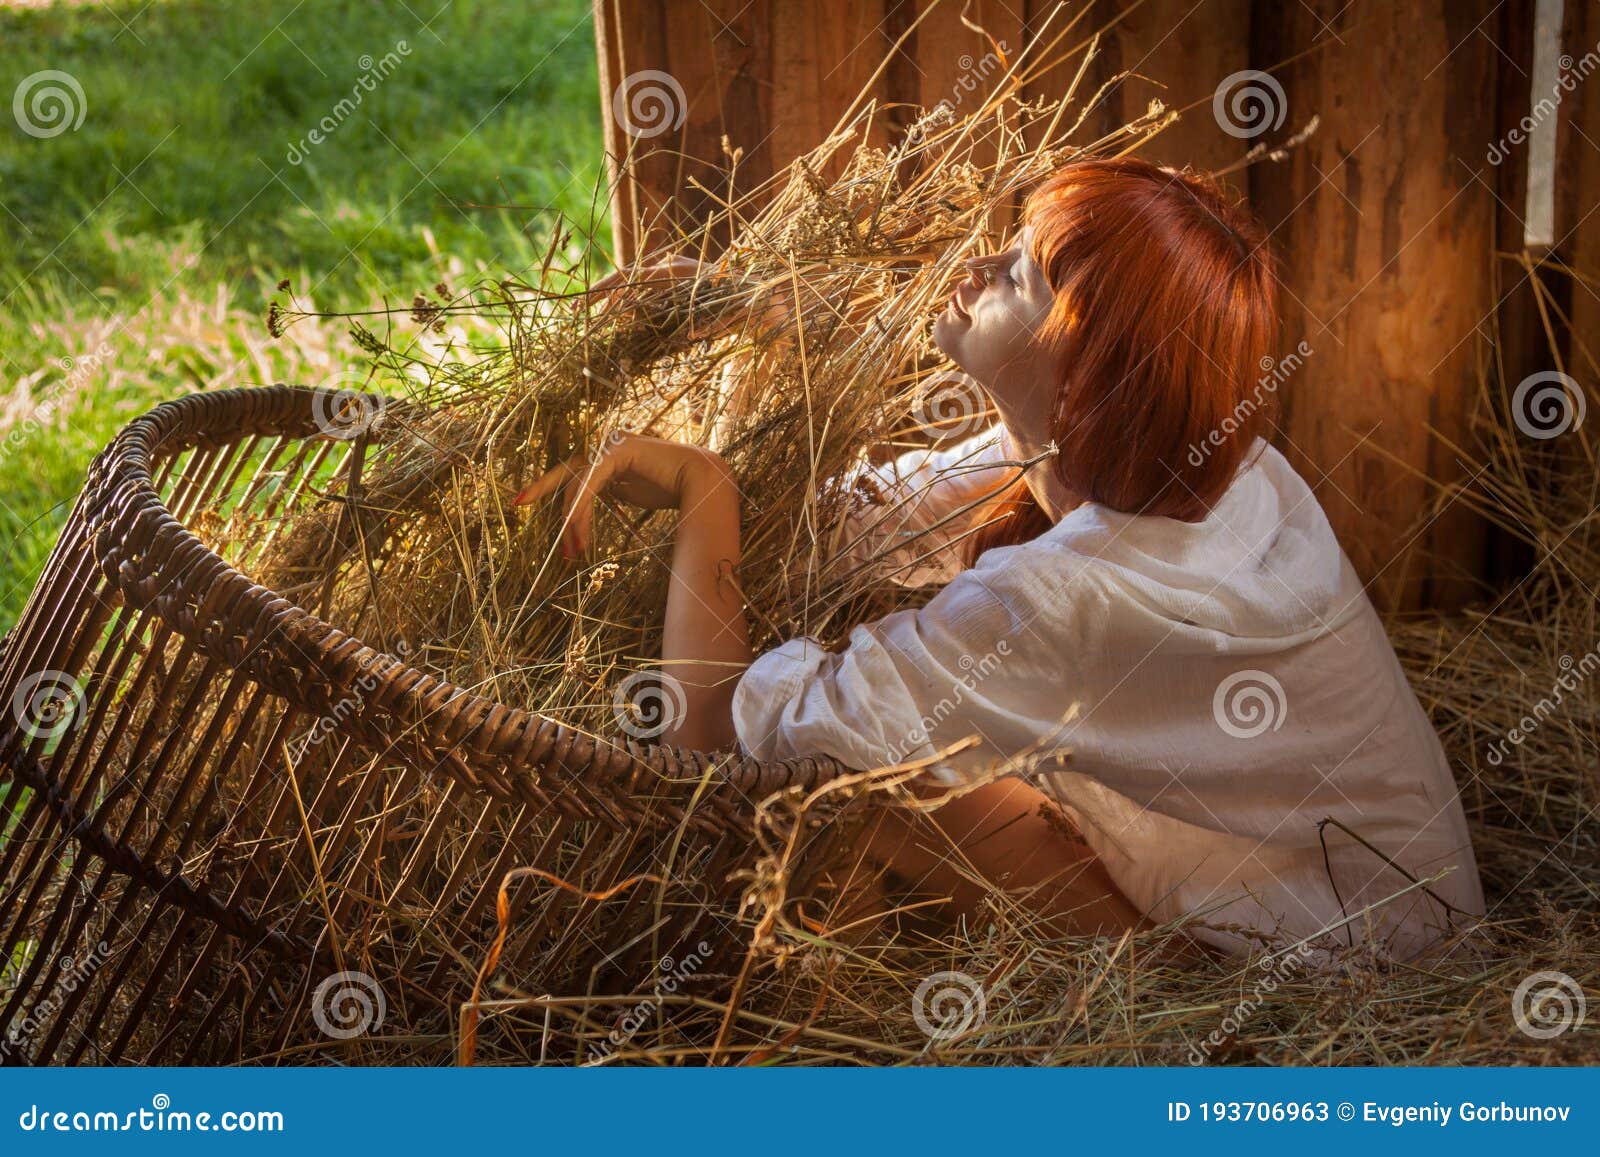 Sex Barn Photos Free Royalty Free Stock Photos From Dreamstime